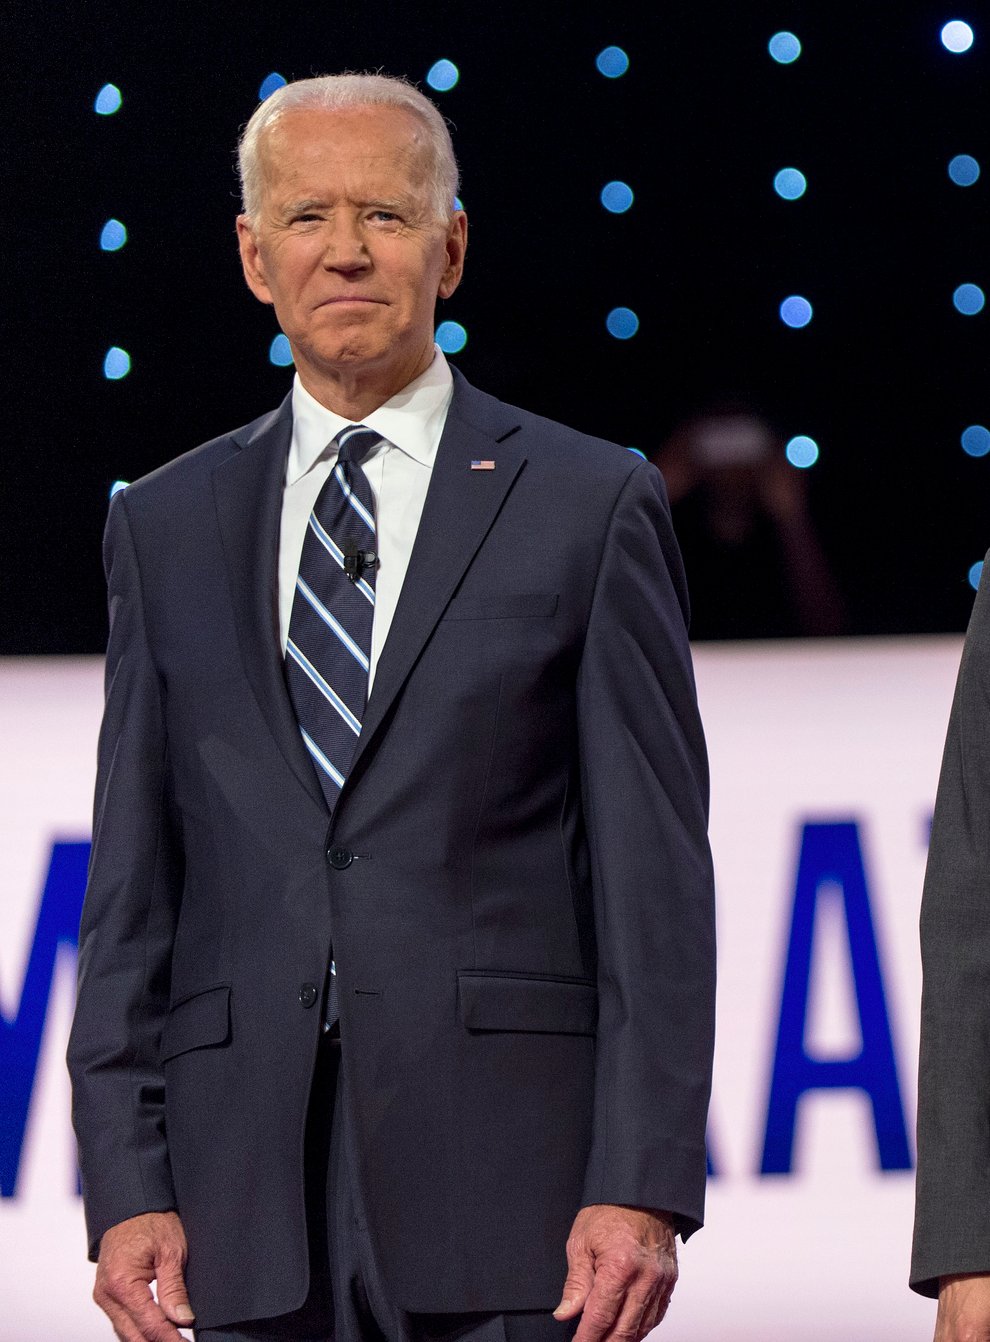 Biden has named Harris as his running mate for  the White House race